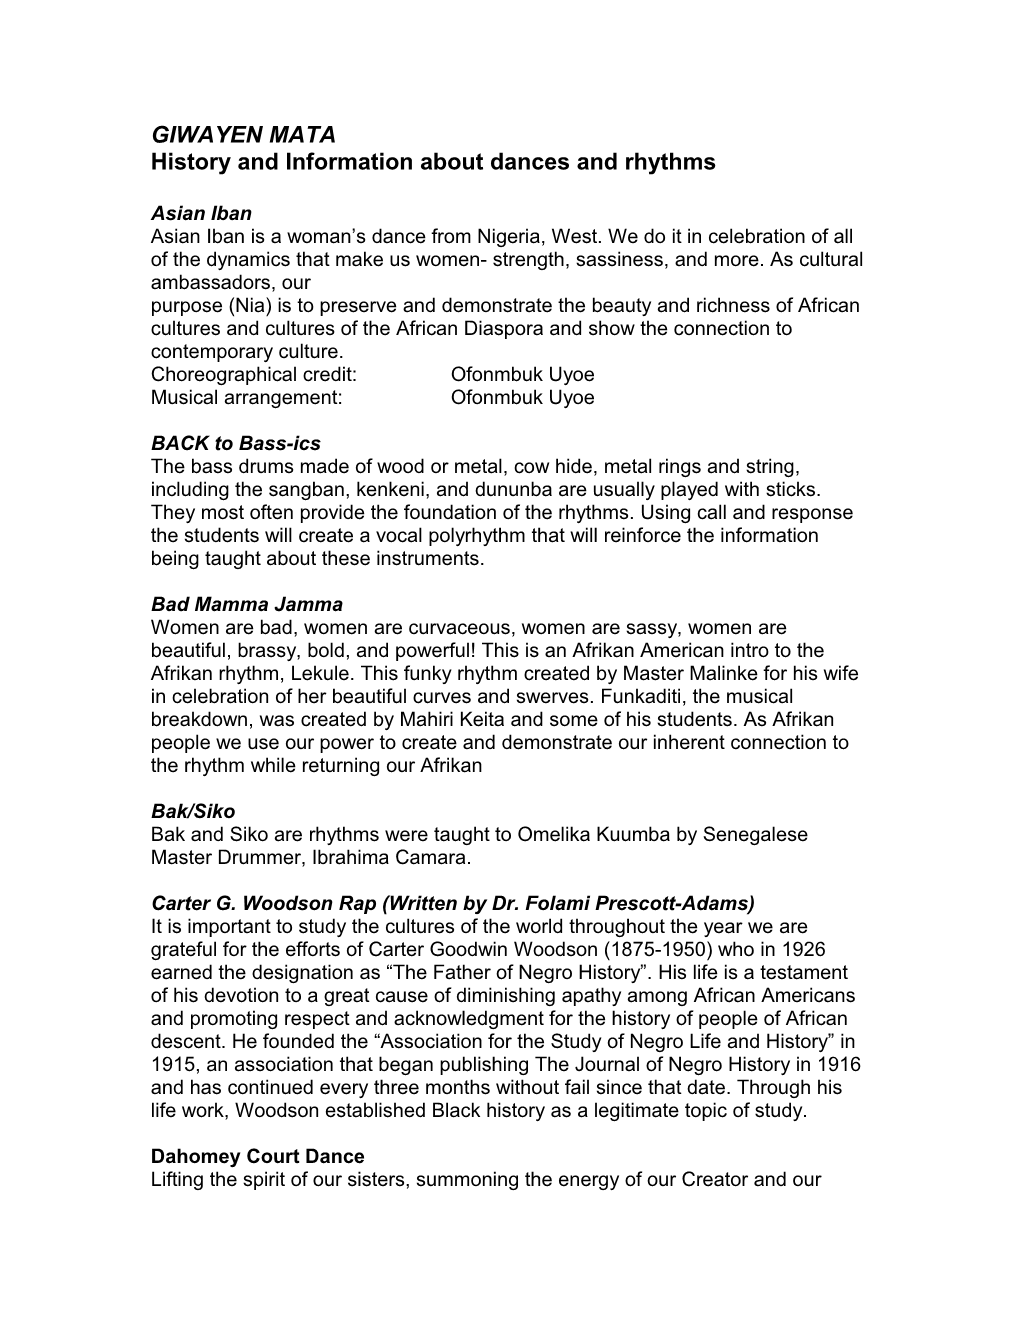 History and Information About Dances and Rhythms